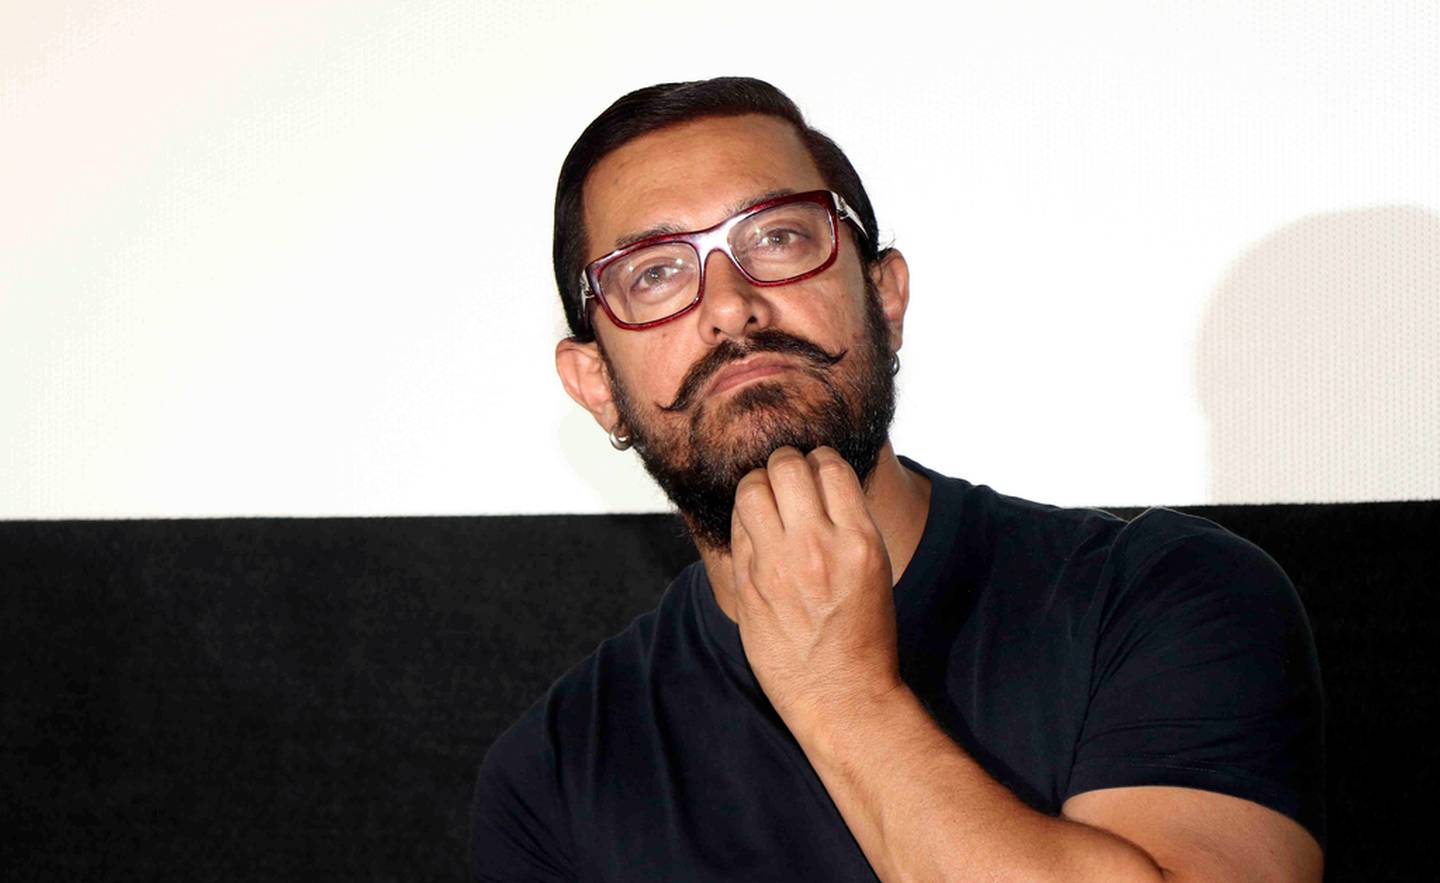 Aamir Khan is waiting to release his film 'Laal Singh Chaddha', long delayed by the pandemic. AFP